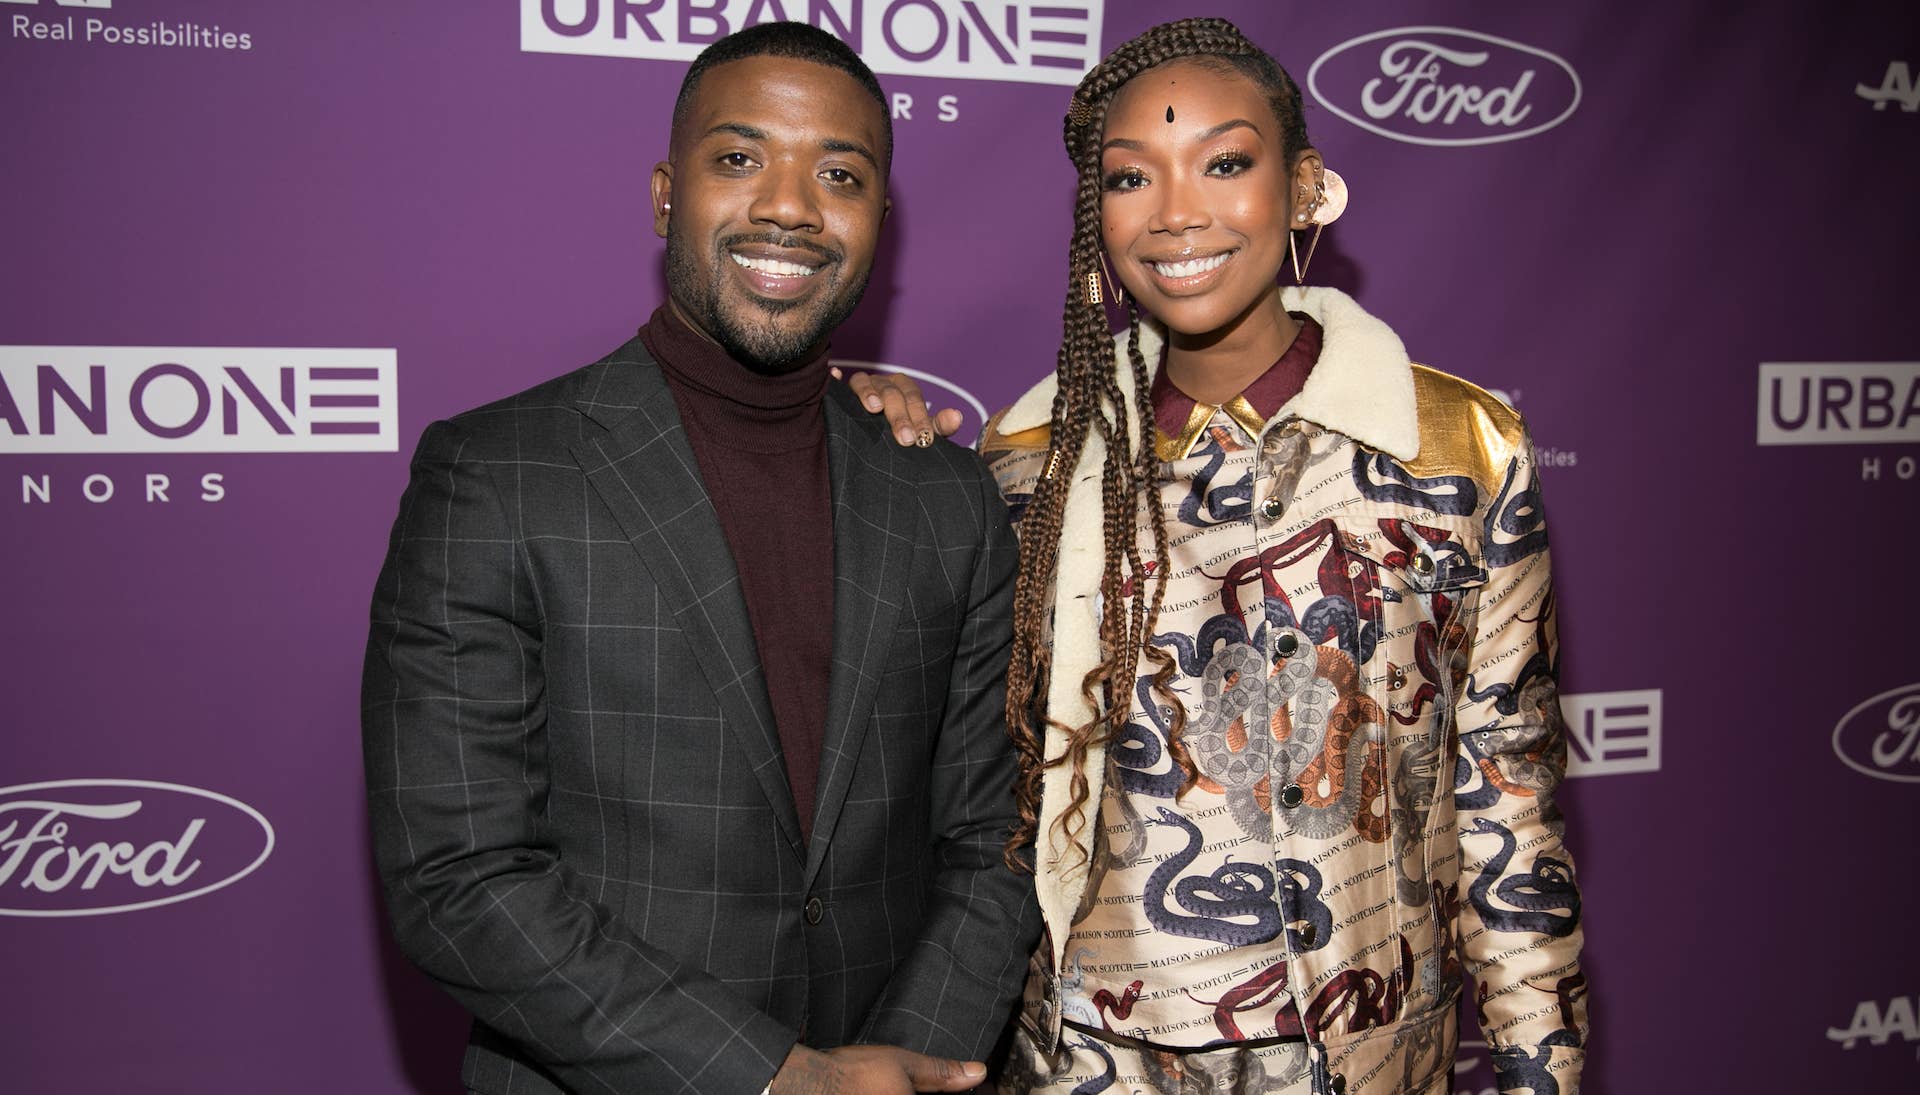 Ray J and Brandy attend the 2019 Urban One Honors